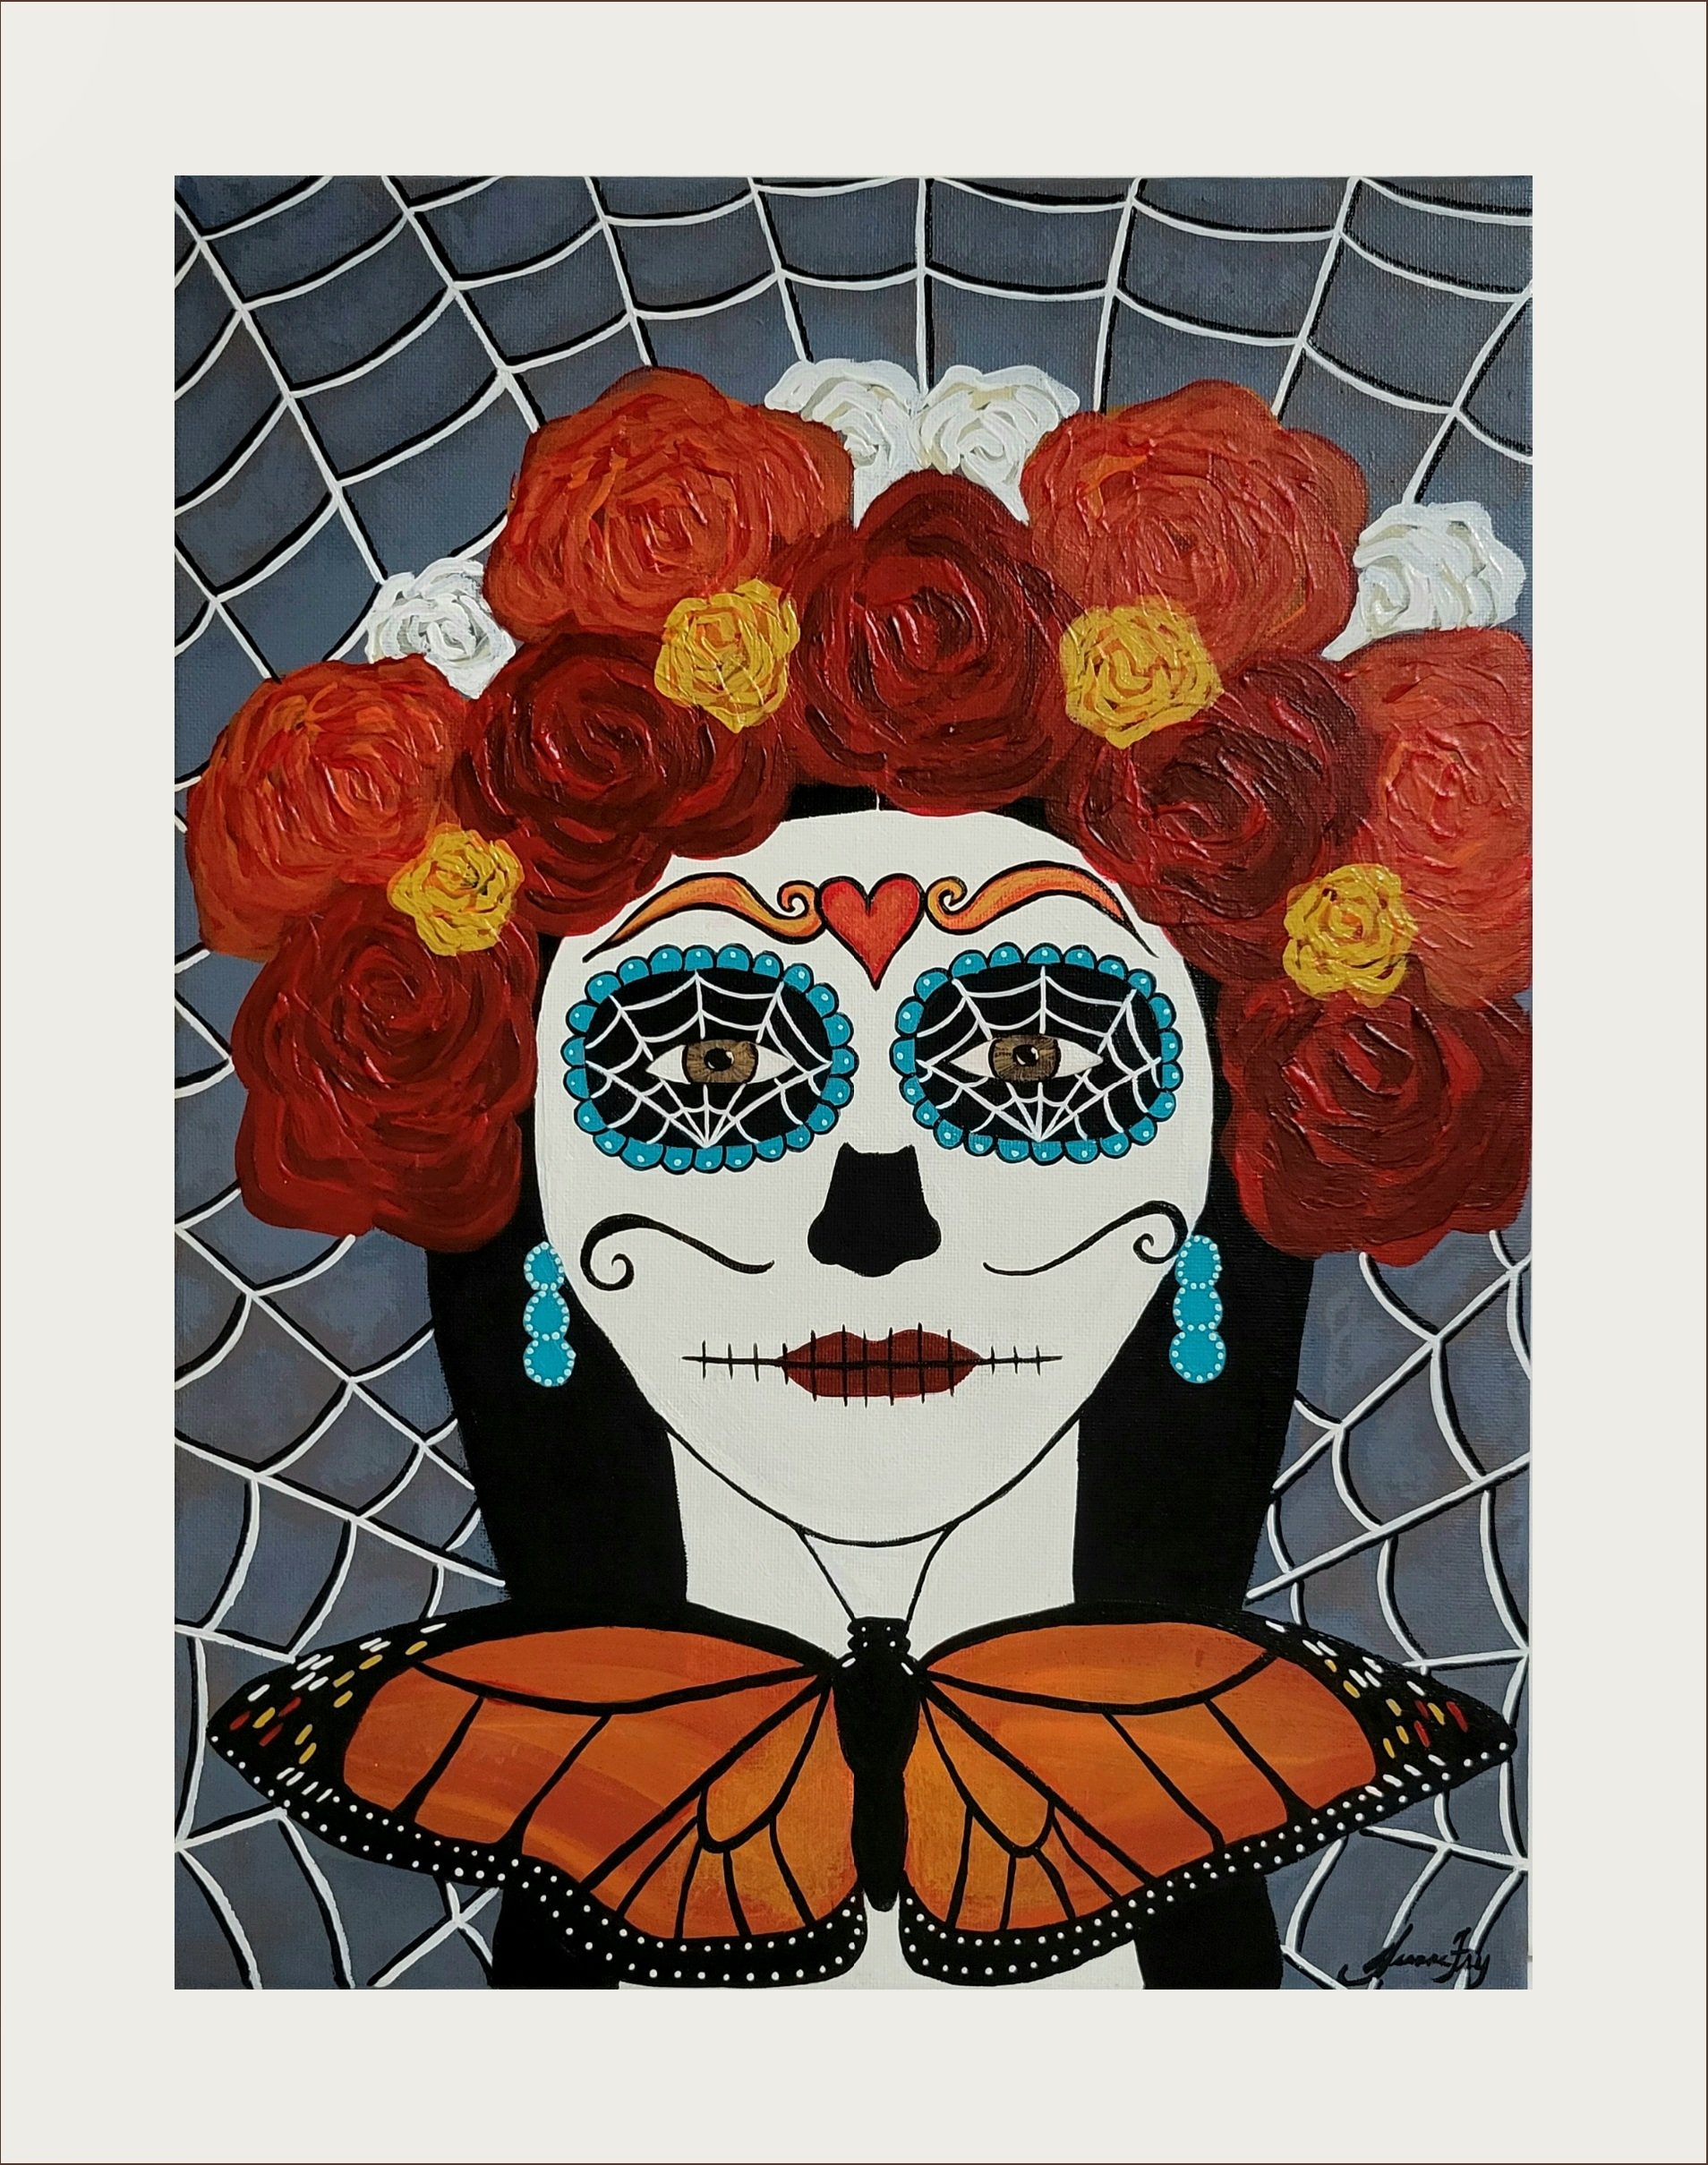 Day of the Dead - Her Monarch Guide - Original Painting 12x16